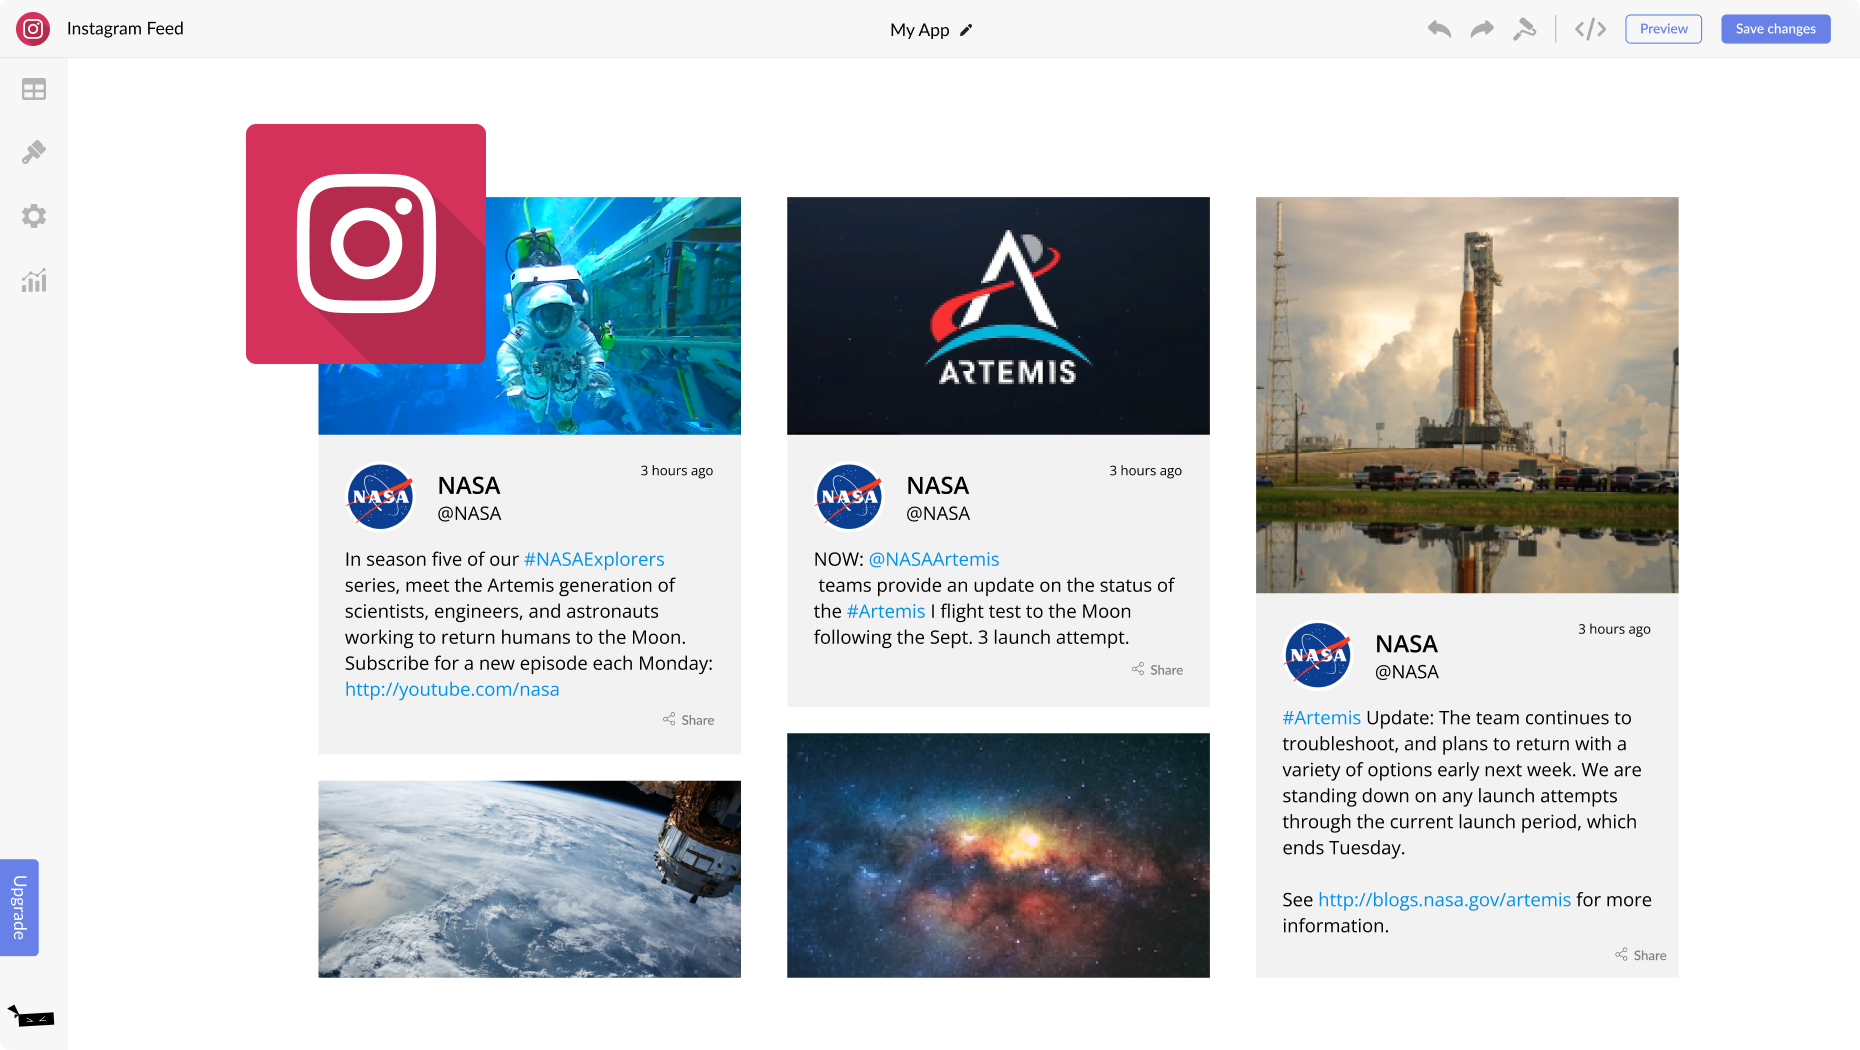 Instagram Feed for Microsoft Power Pages